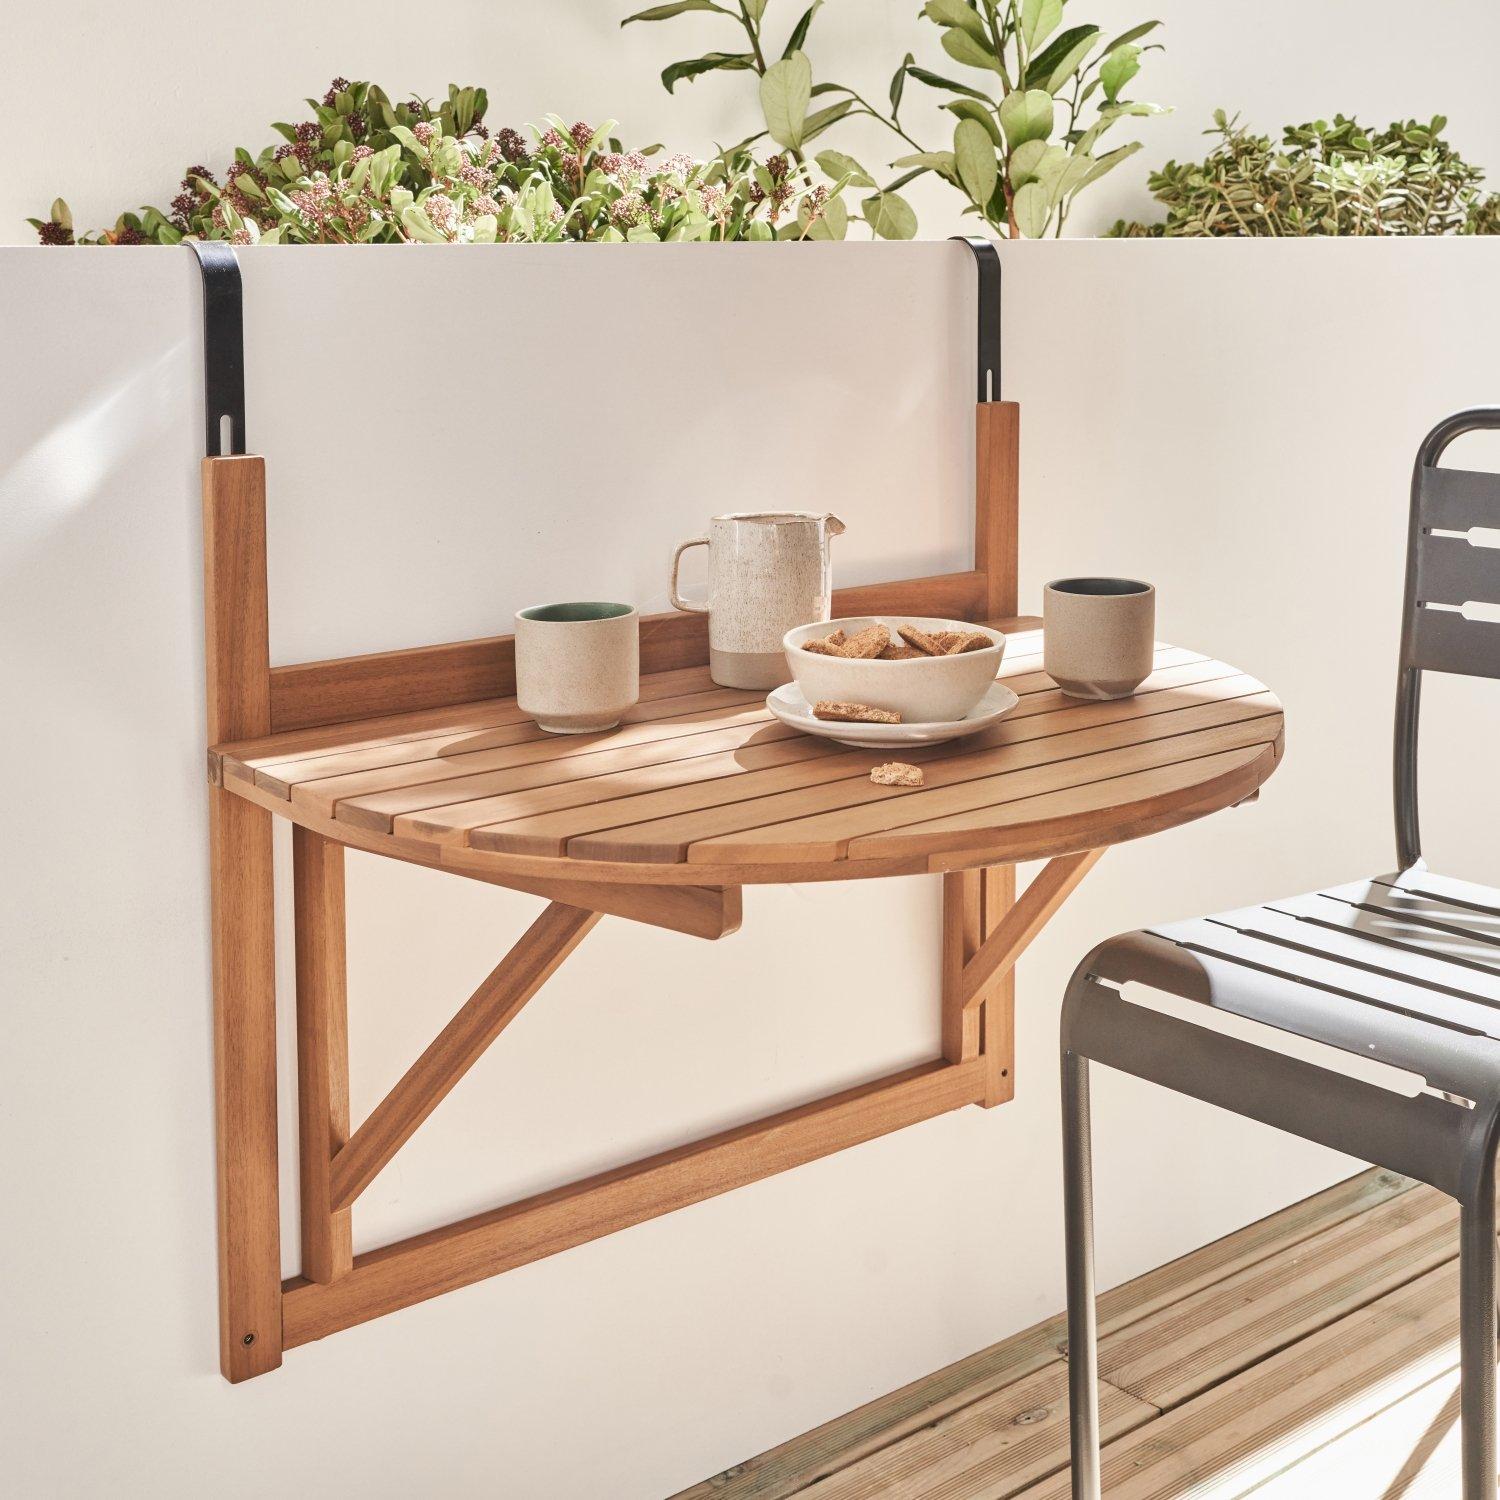 Wooden Side Table For Balcony Semi-round Foldable